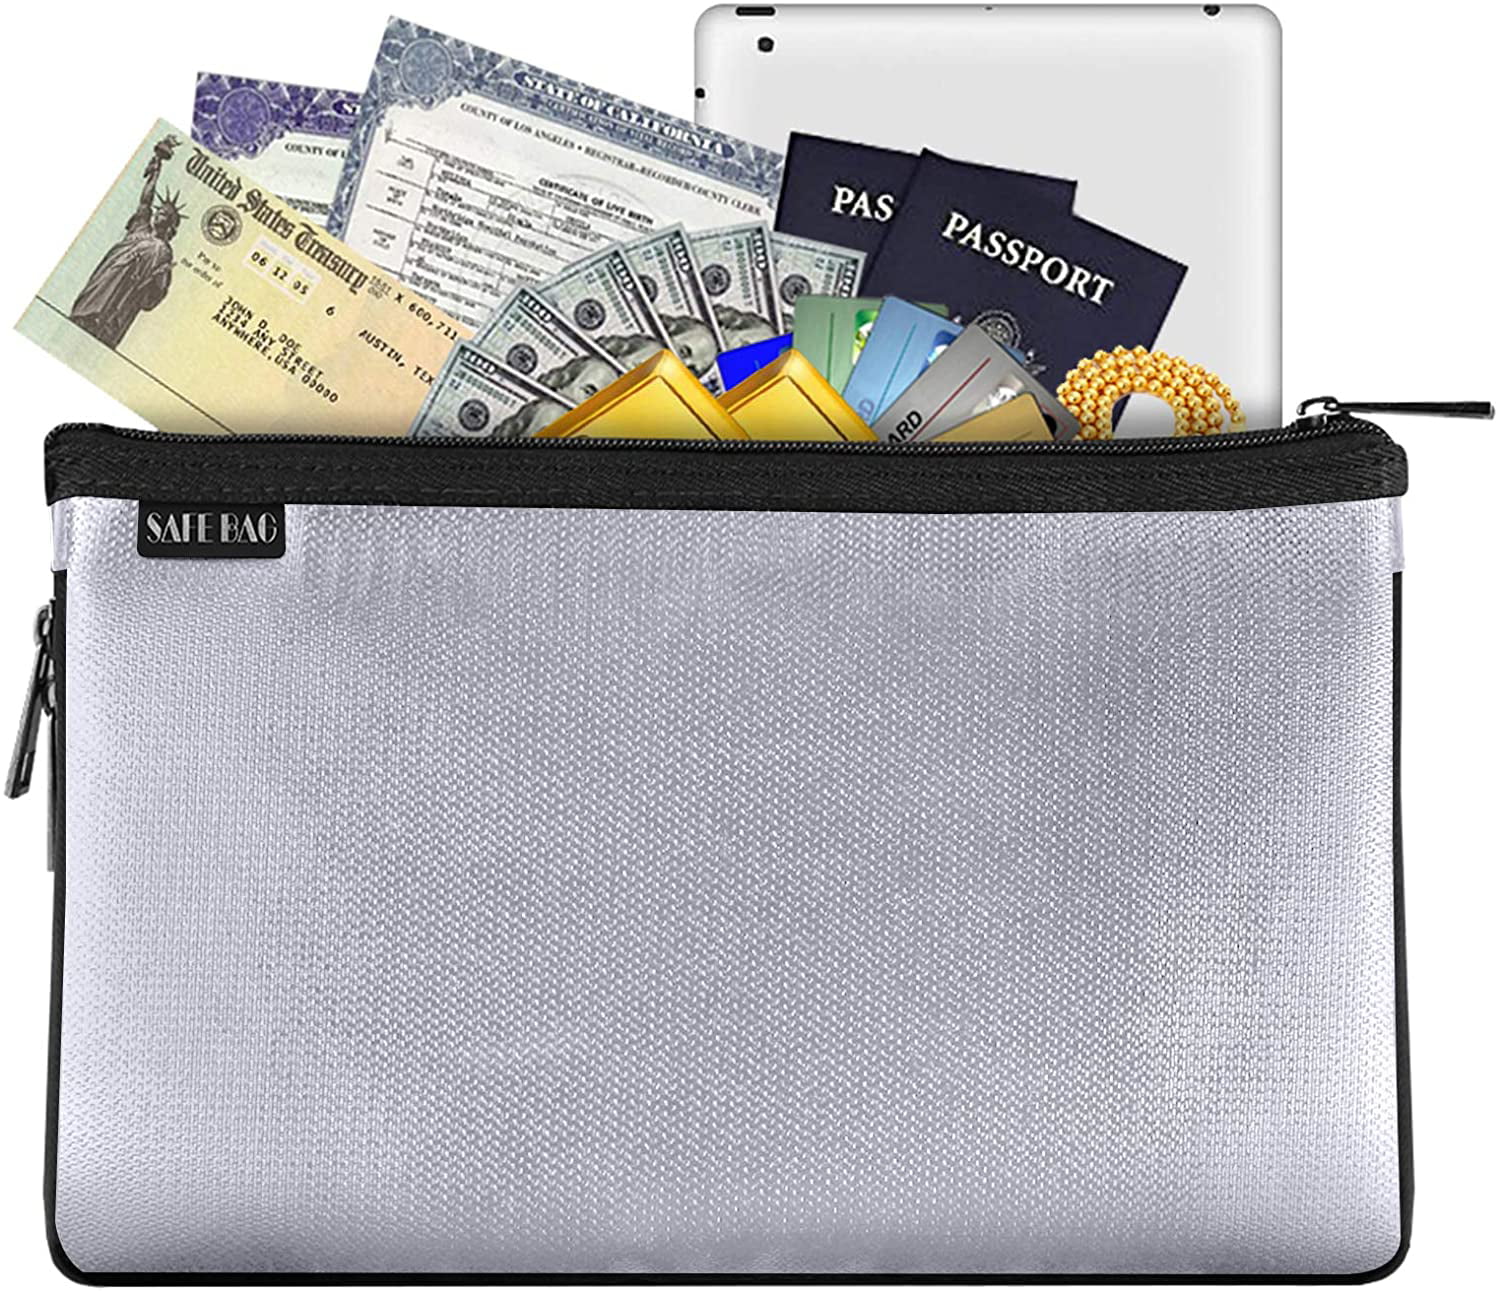 Water Resistant and Fireproof Money Bag,Fire Resistant Safe Storage Pouch Envelope for Document,Money,Cash and Passport Fireproof Document Bag 